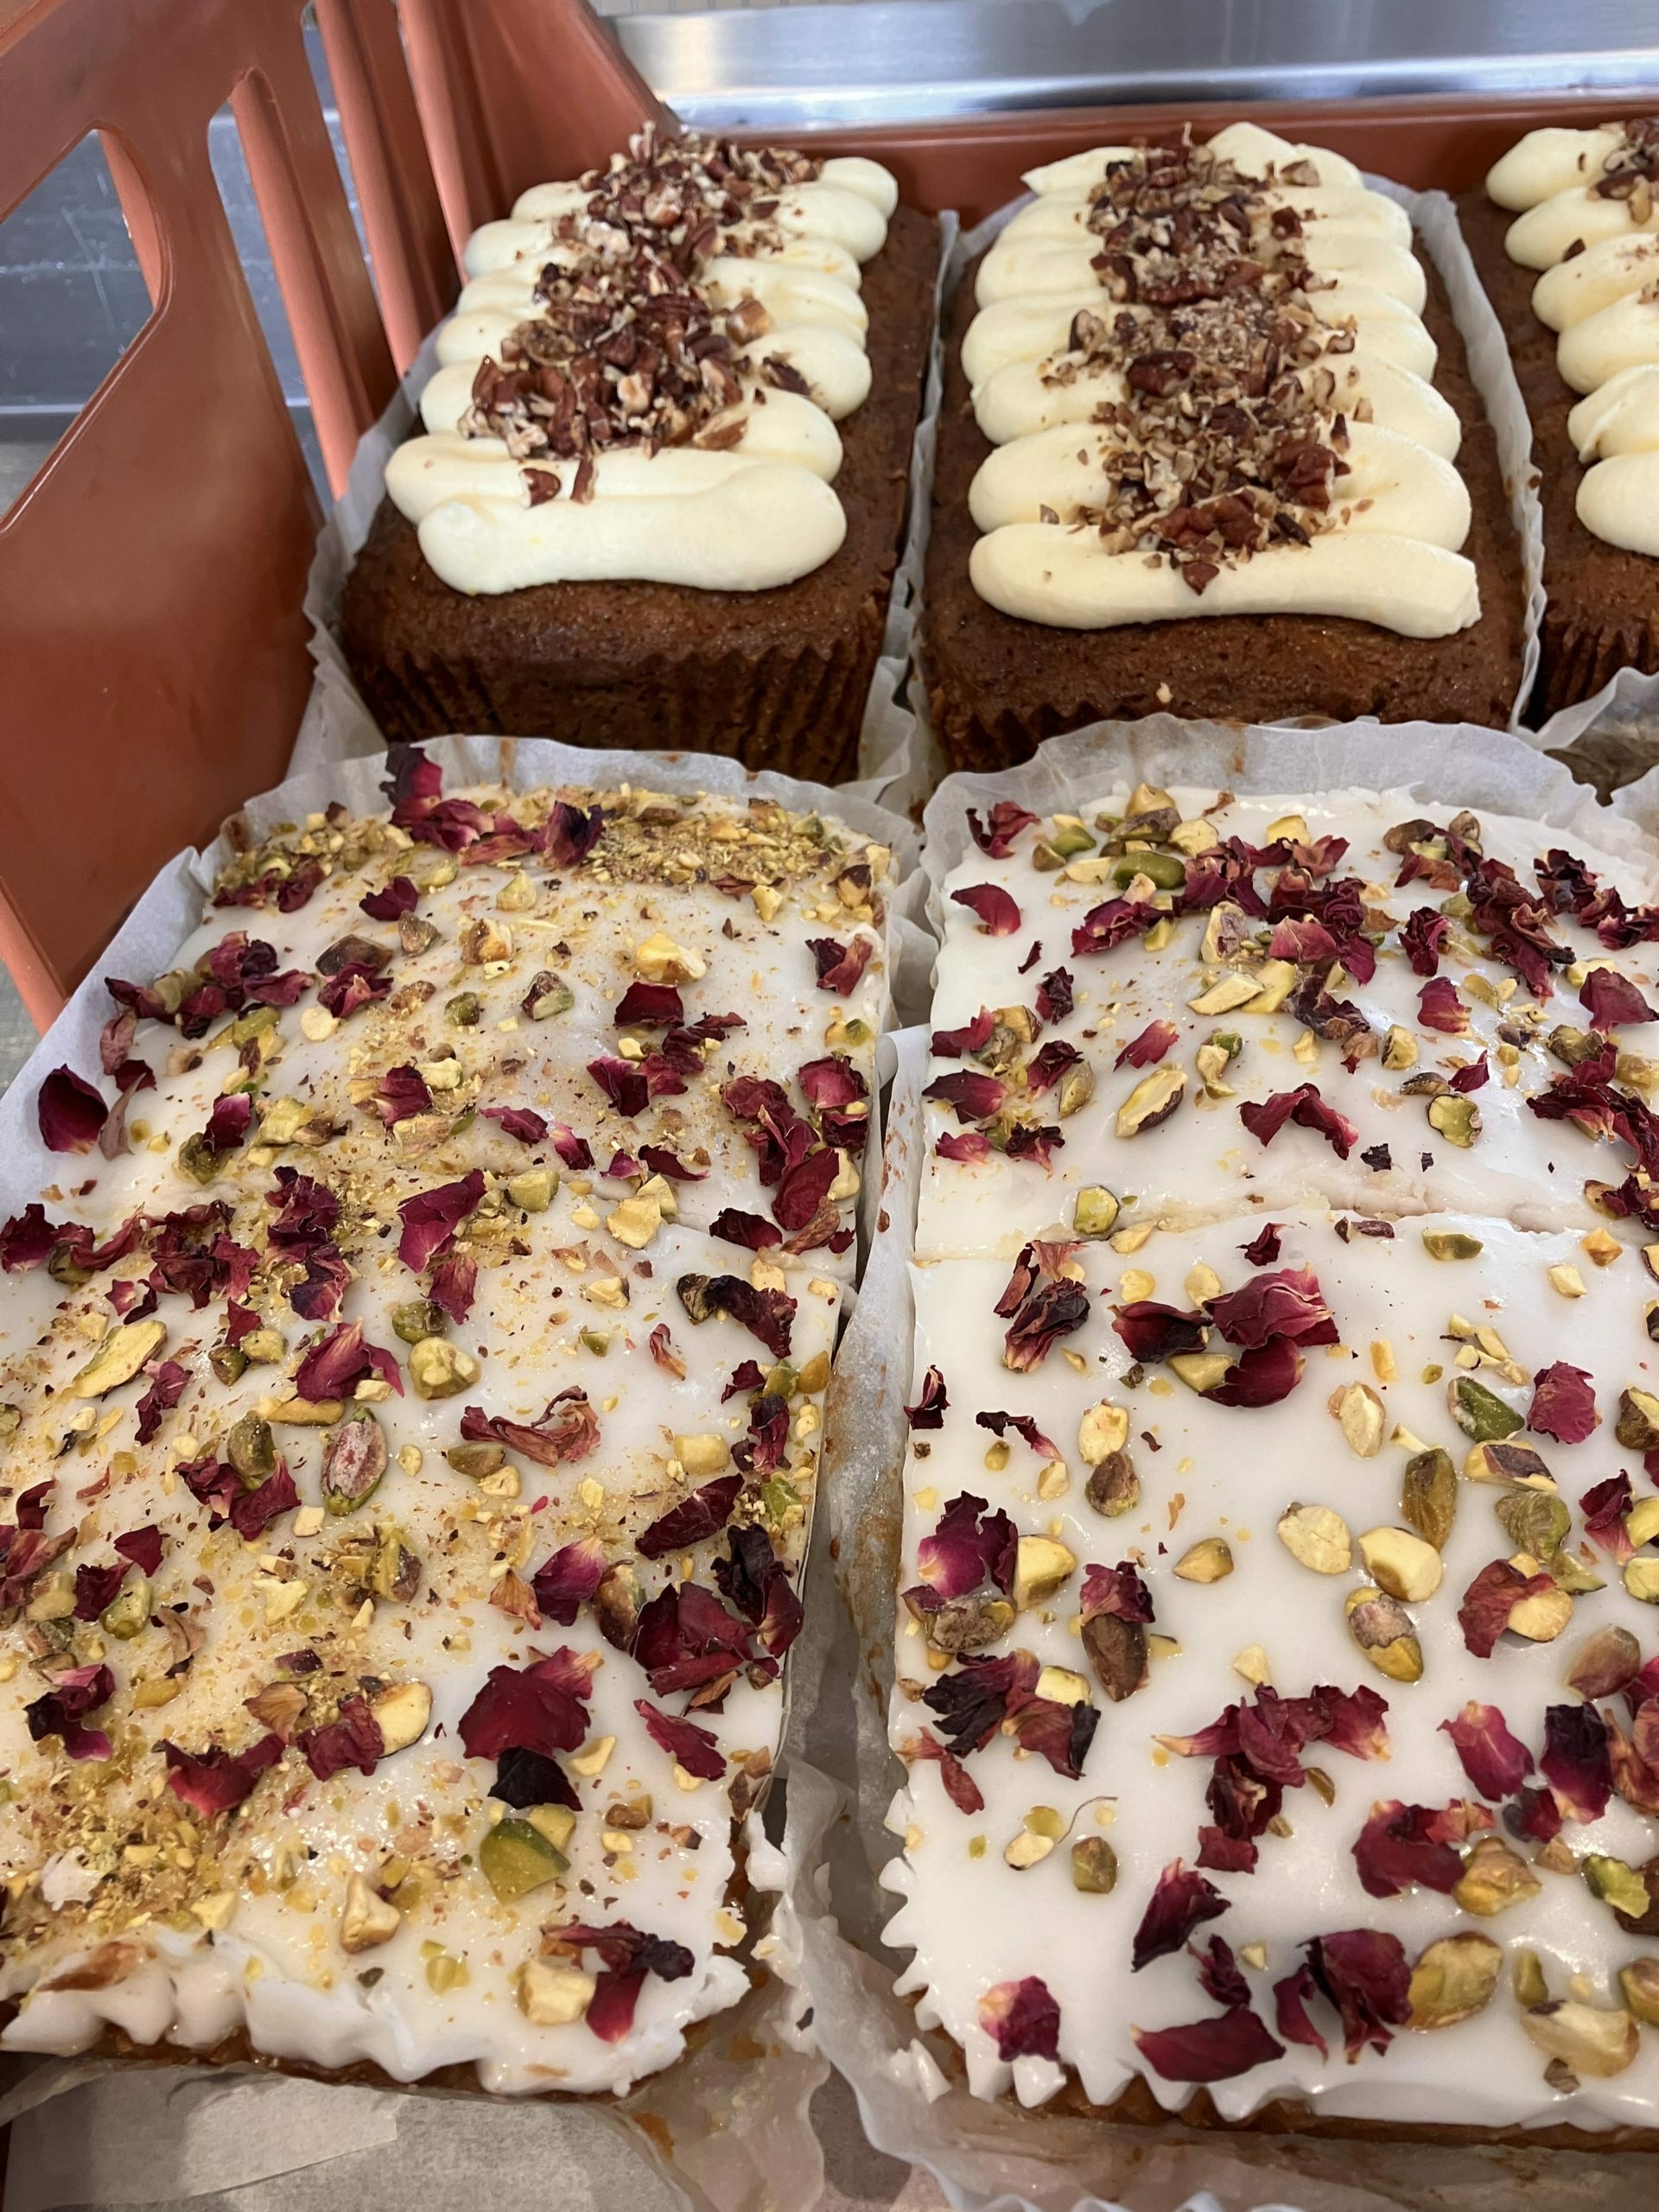 the best wholesale cakes are lined up in a tray. The front two are Persian Love Cakes and heavily decorated. The back 3 are carrot cake loaves.